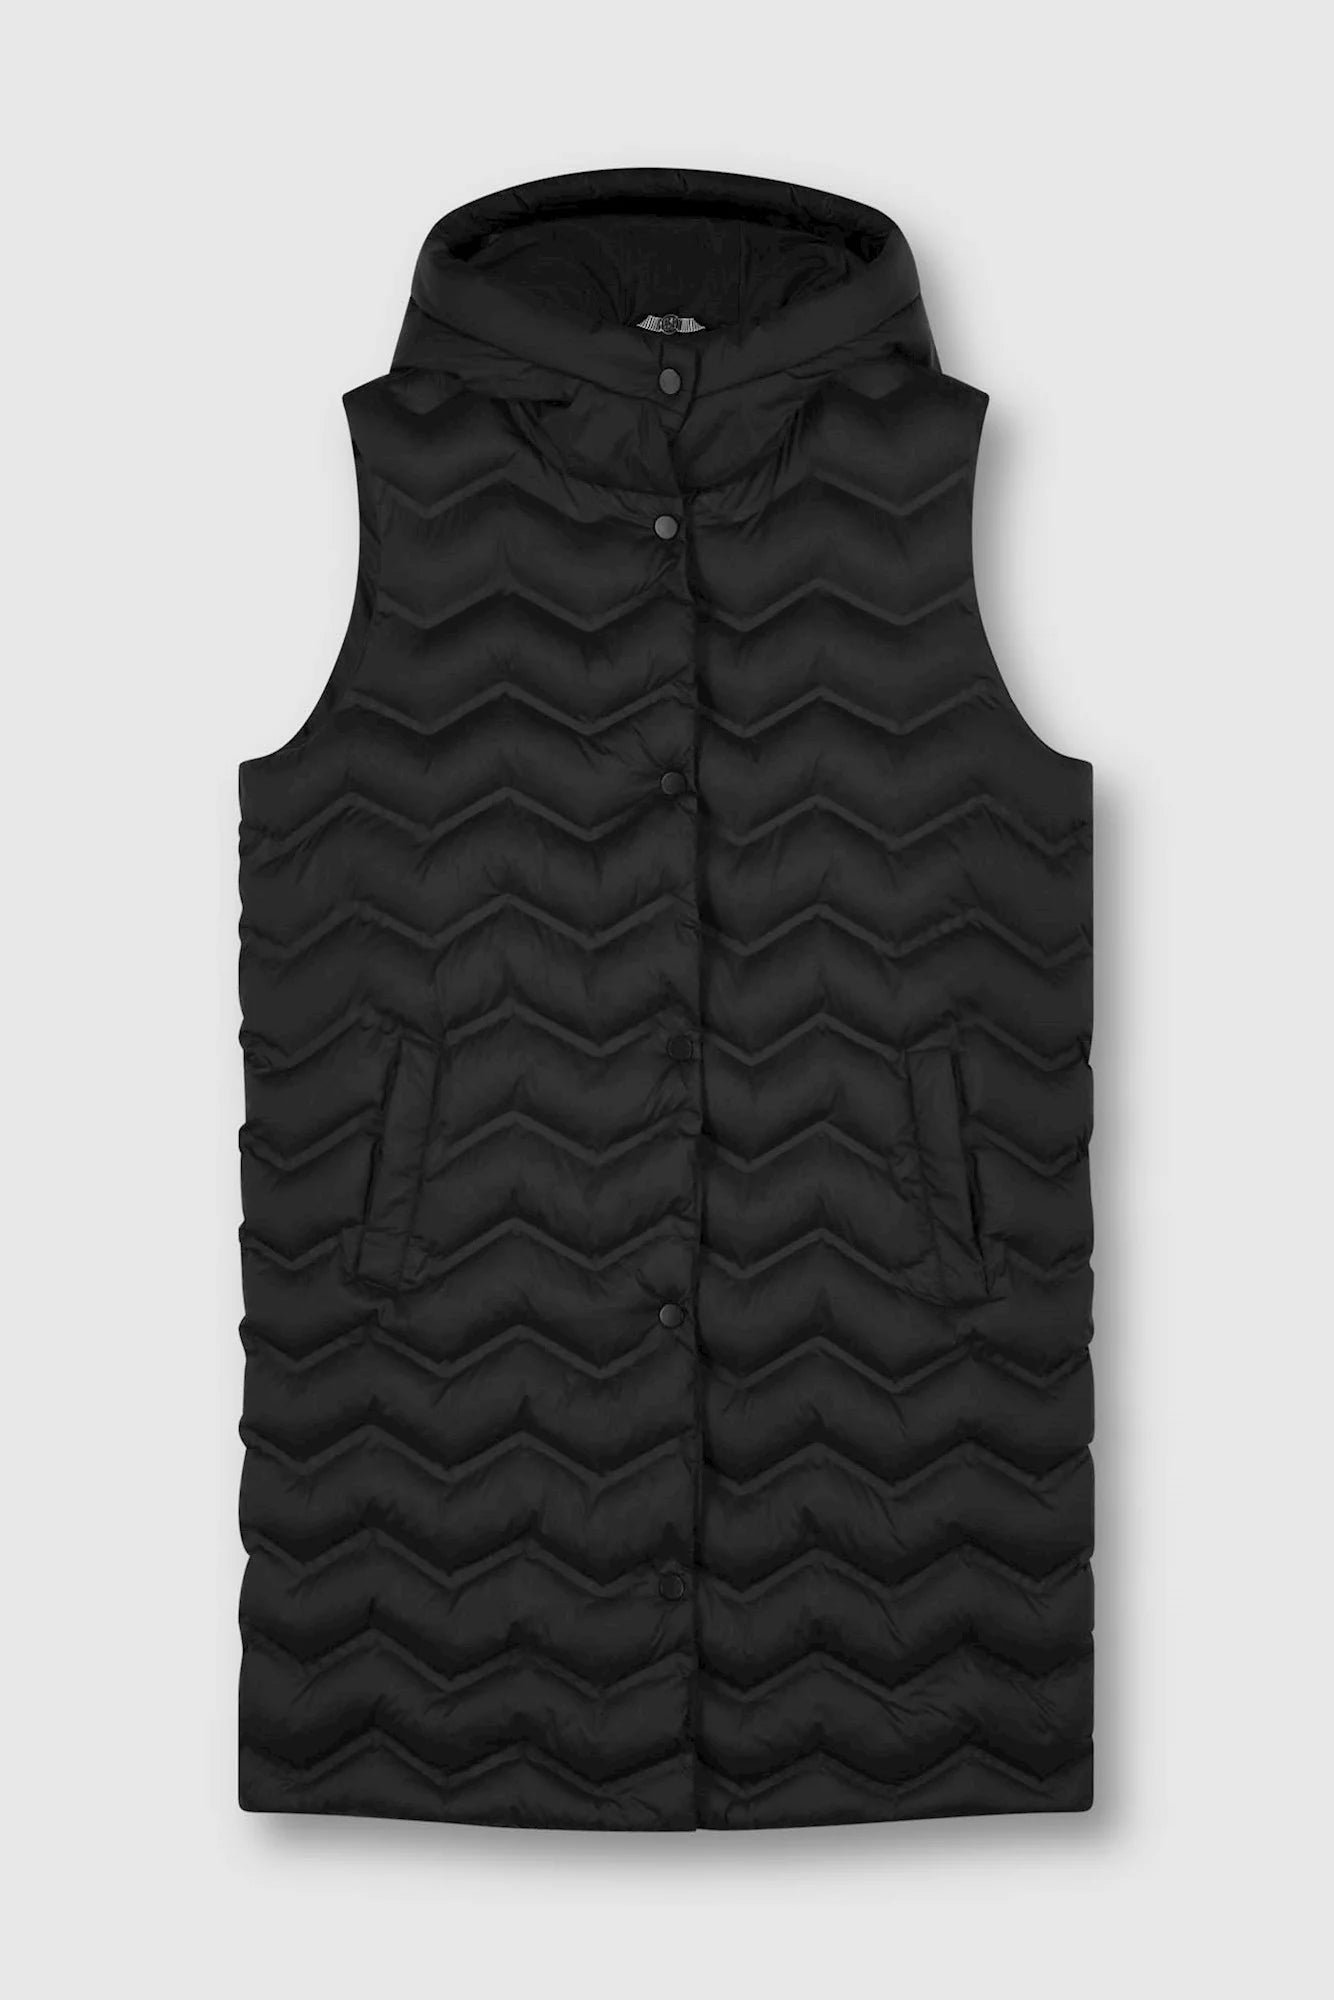 Photo of Joyce Waistcoat in Black on a white backdrop from Rino and Pelle available at UniKoncept in Waterloo front view